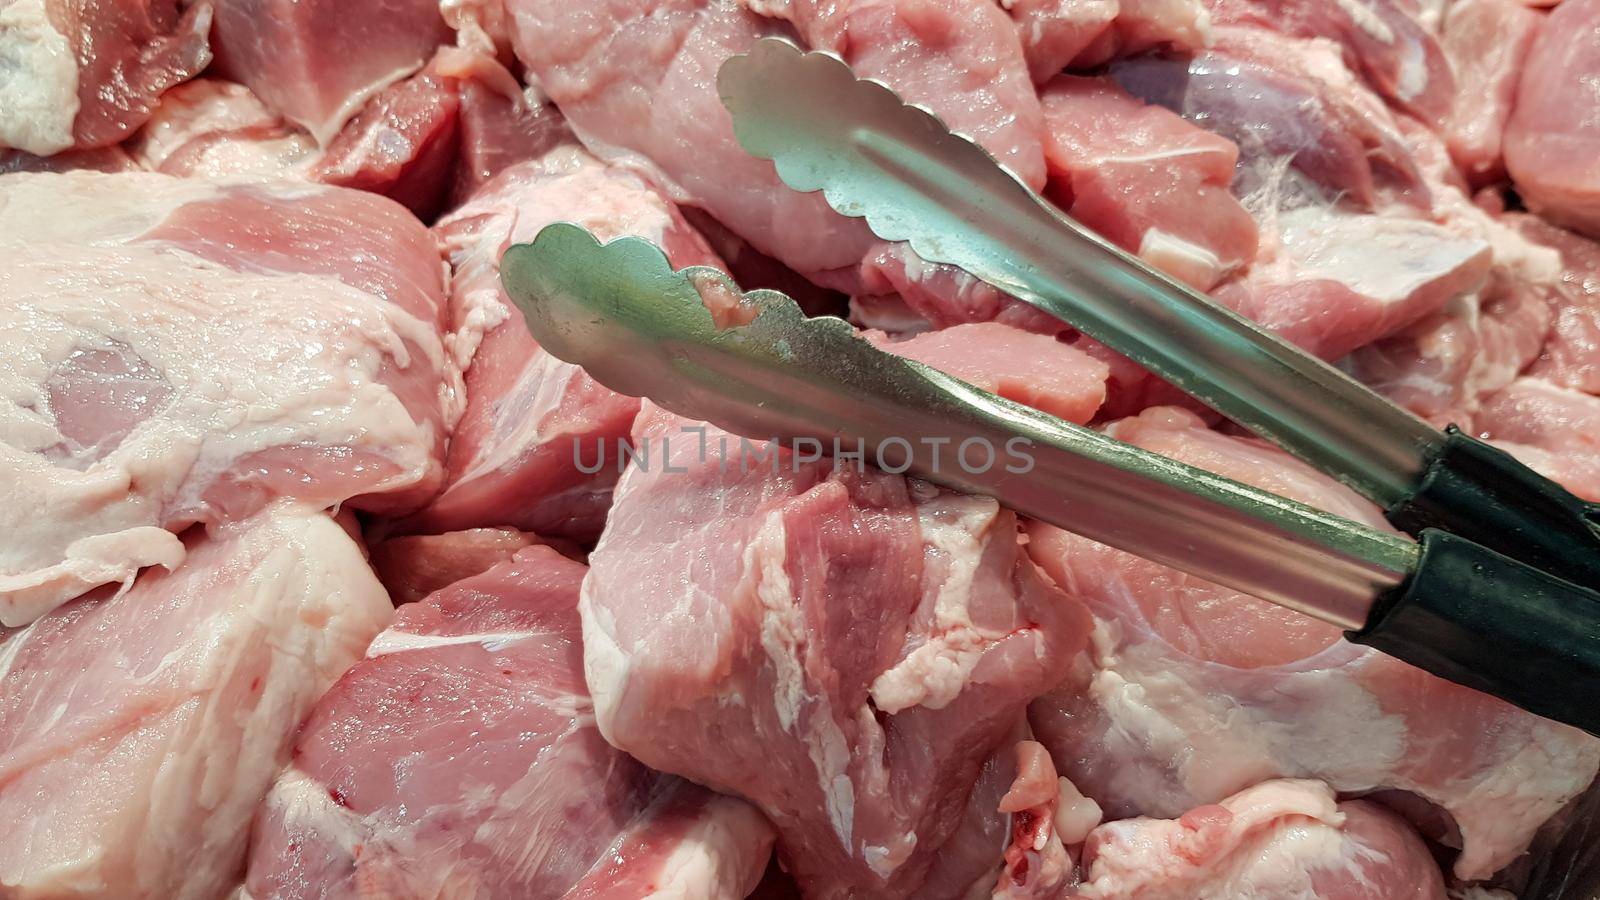 Pork is sold in a tray with steel tongs with a black handle. by pichai25